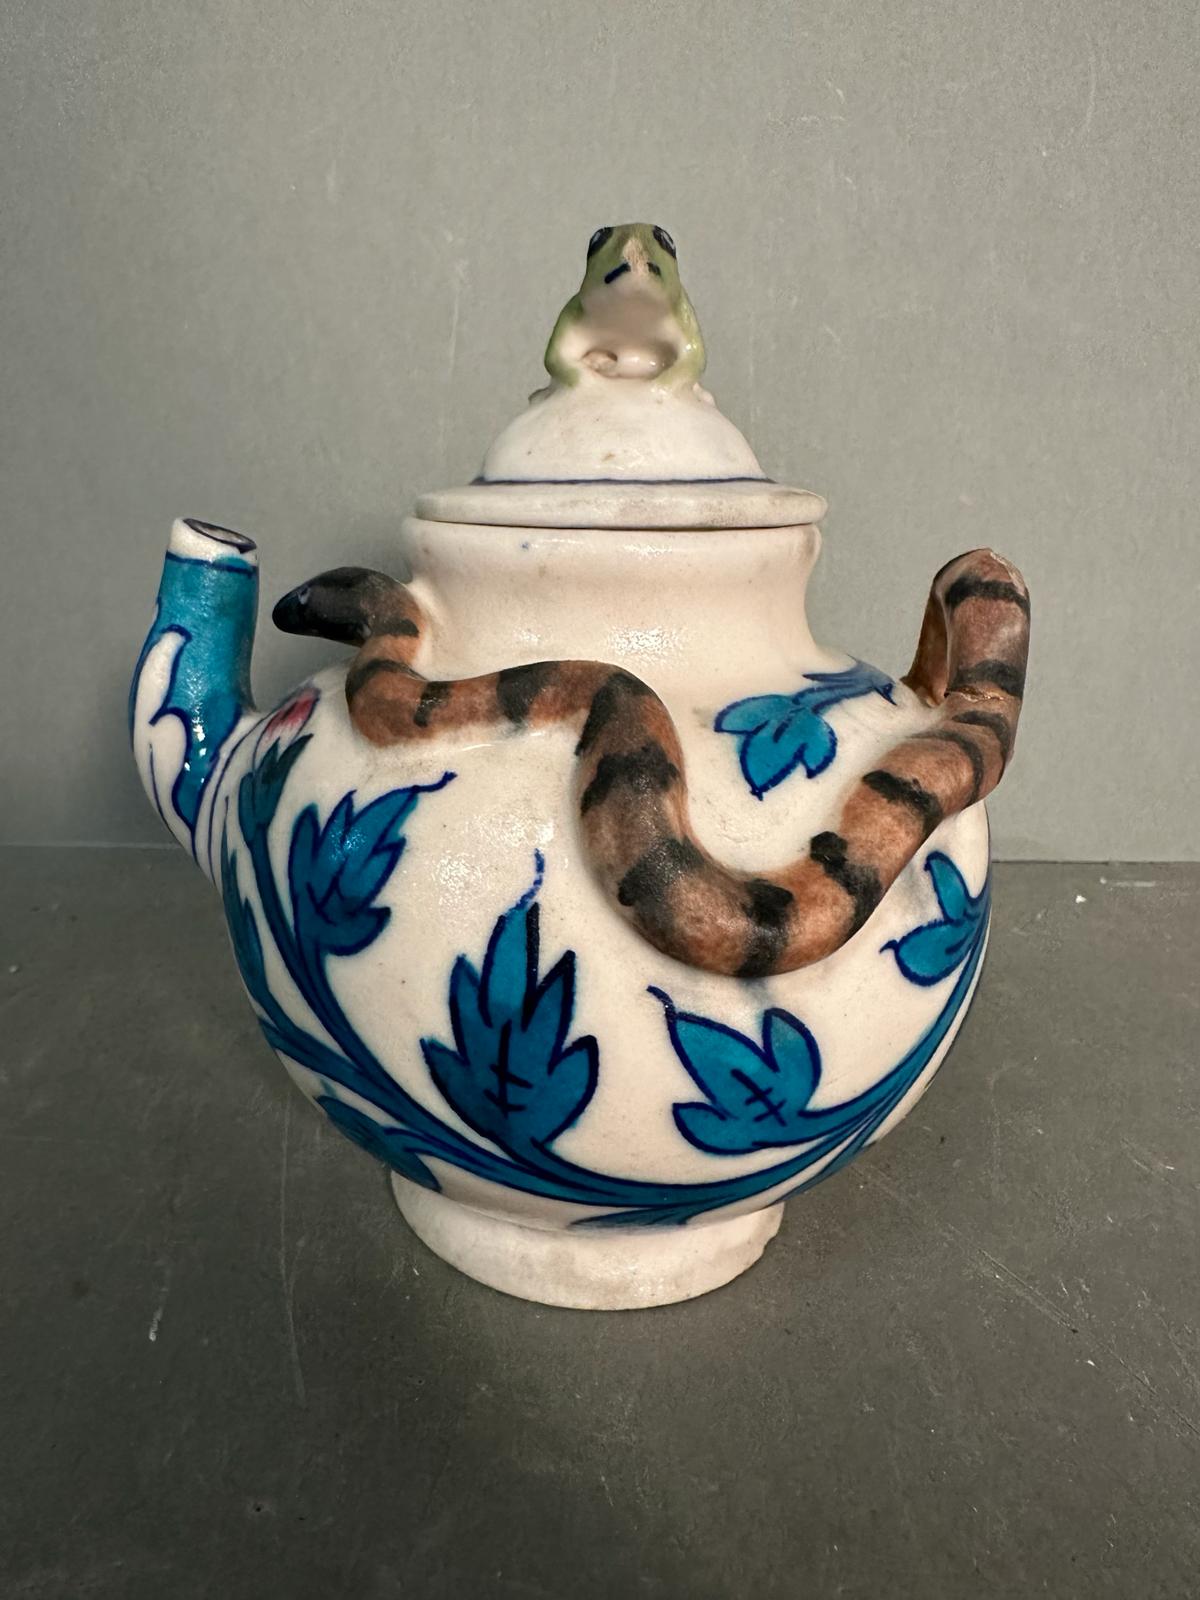 A small Chinese style teapot with a blue leaf design, snake handle and a decorative frog finial to - Image 3 of 4